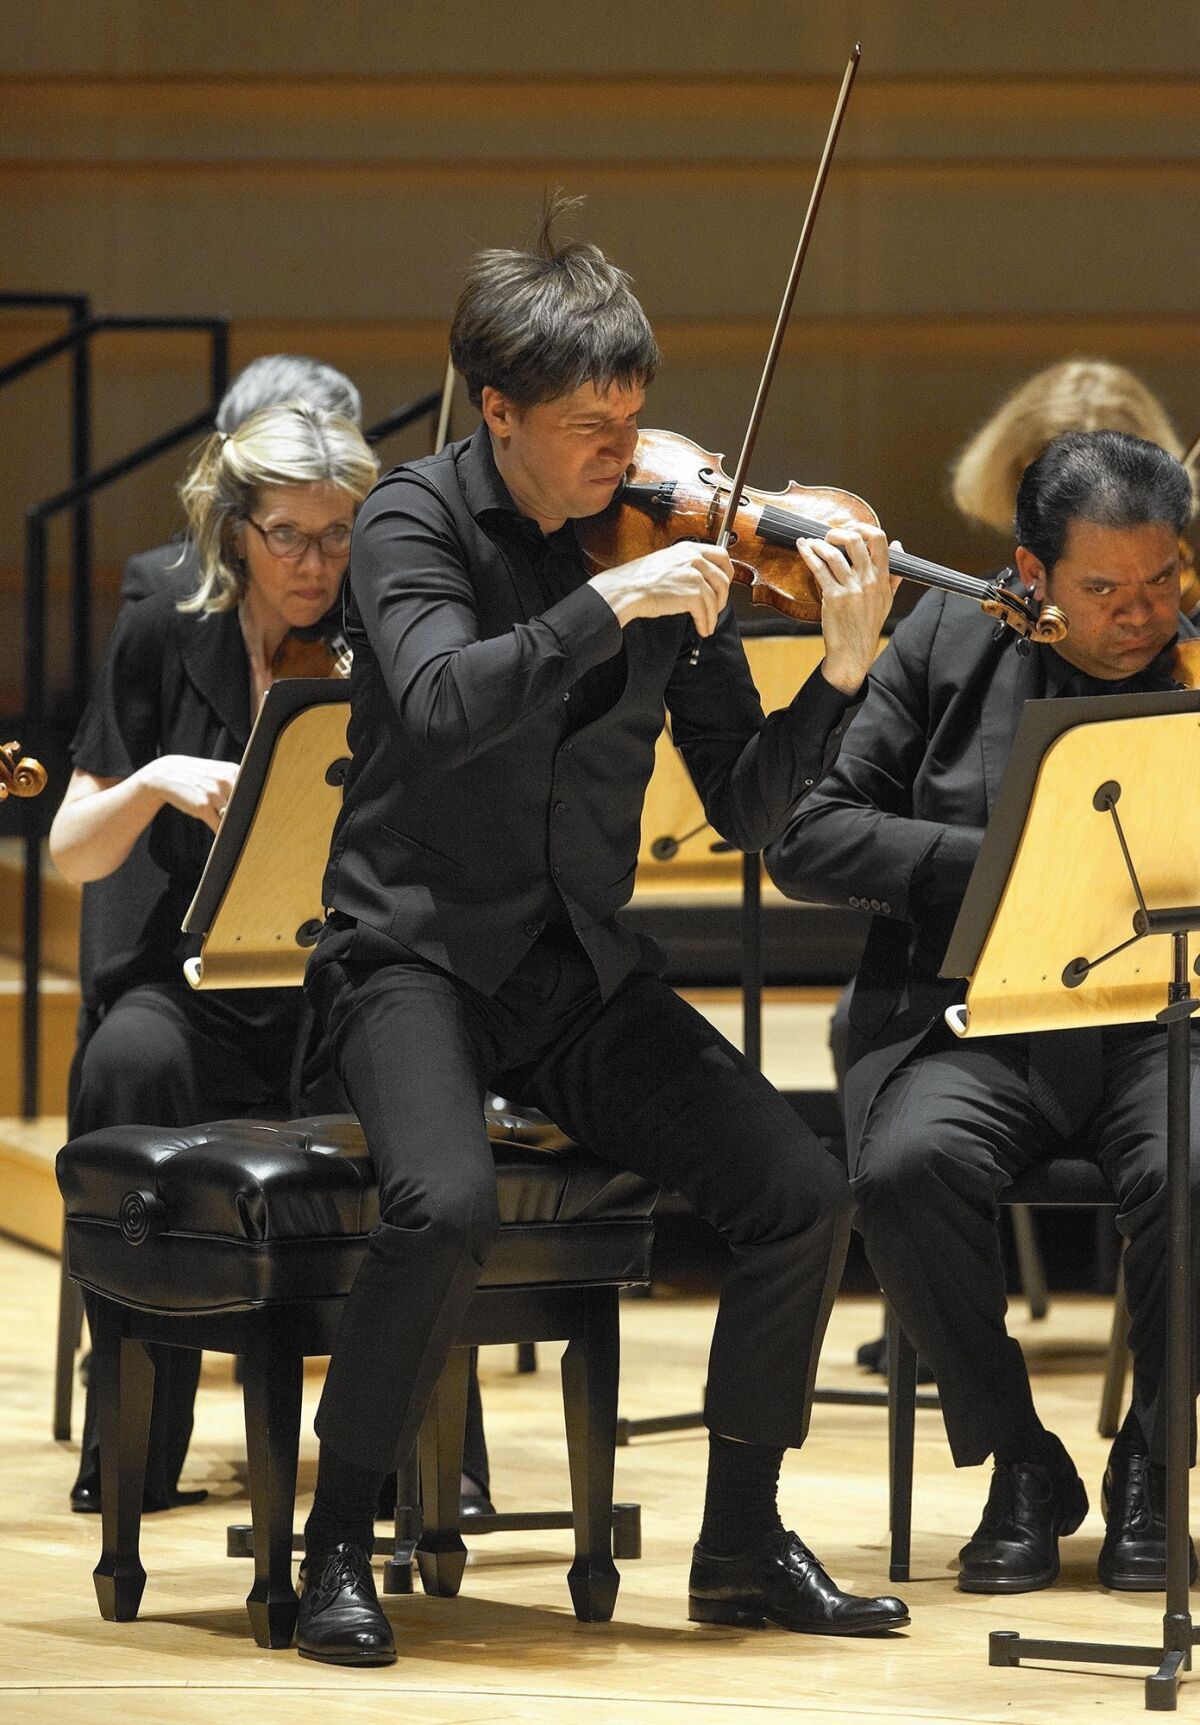 Violinist and conductor Joshua Bell performs Prokofiev's Symphony No. 1 during the Academy of St. Martin in the Fields concert at the Renee and Henry Segerstrom Concert Hall in Costa Mesa on Monday.